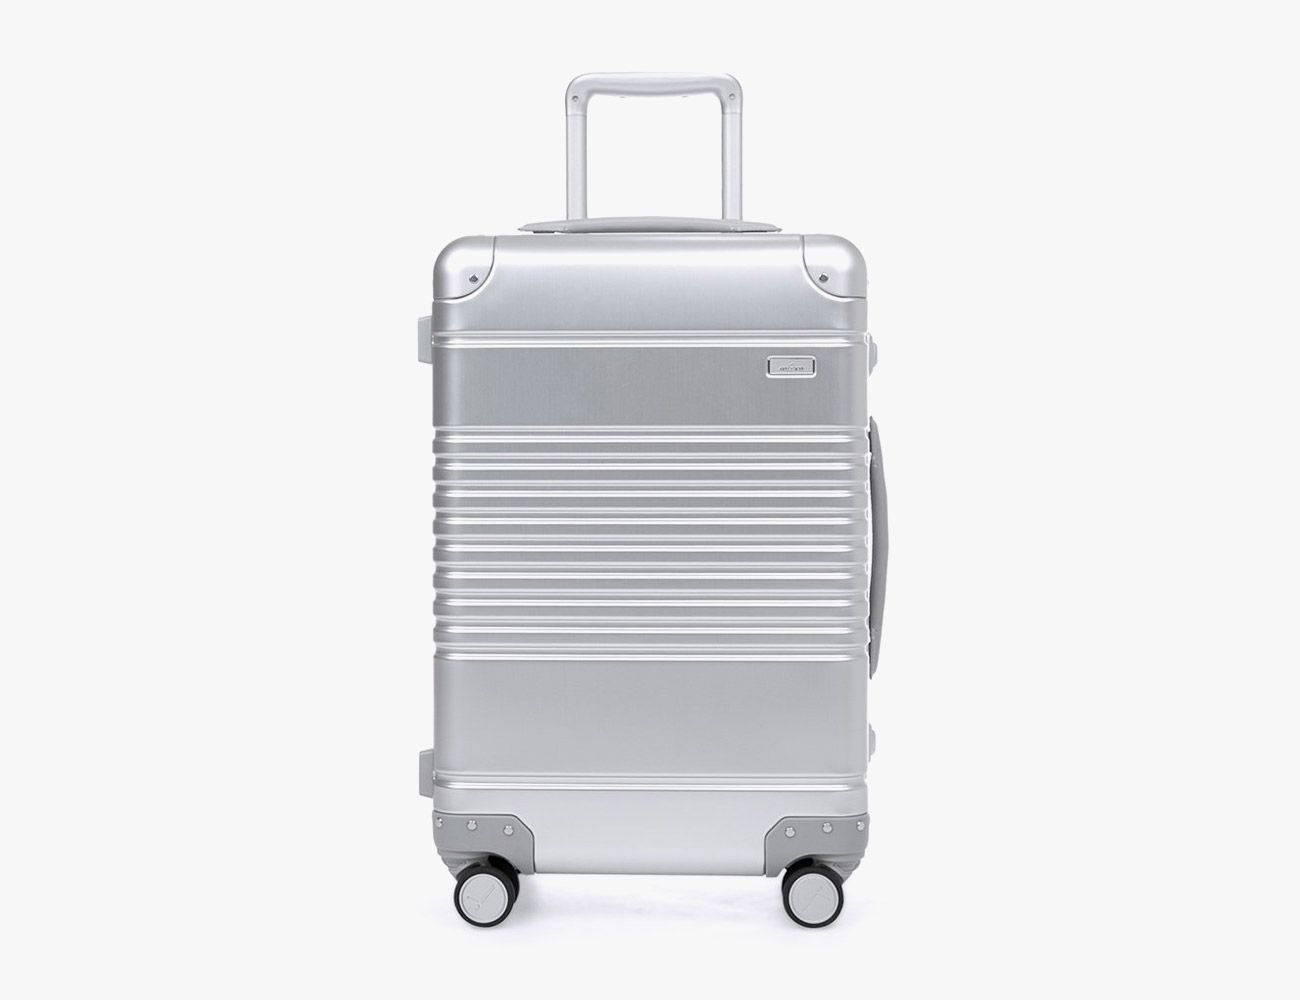 Review: How does the Autonomous Aluminum Carry-On Compare to